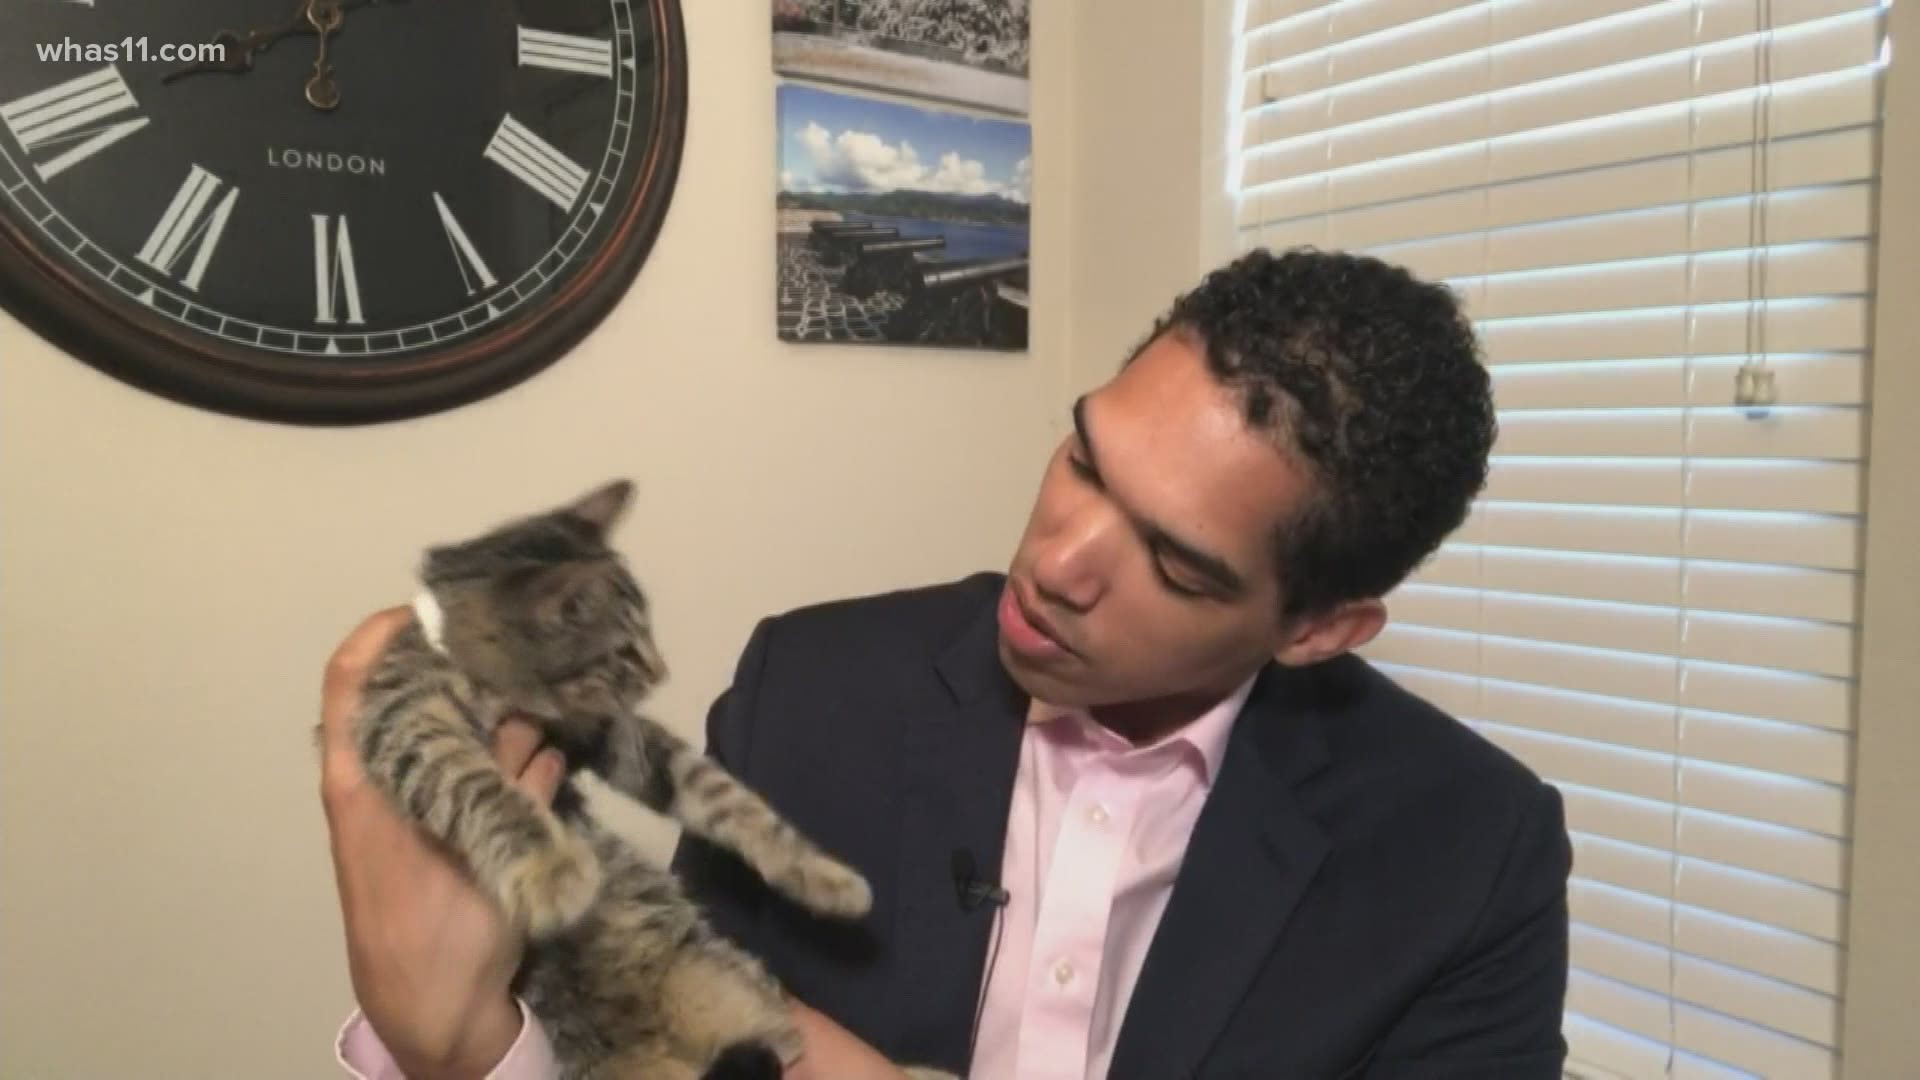 Meteorologist Alden German has been fostering little Bronx and this three-and-a-half month old kitten is ready for his forever home!